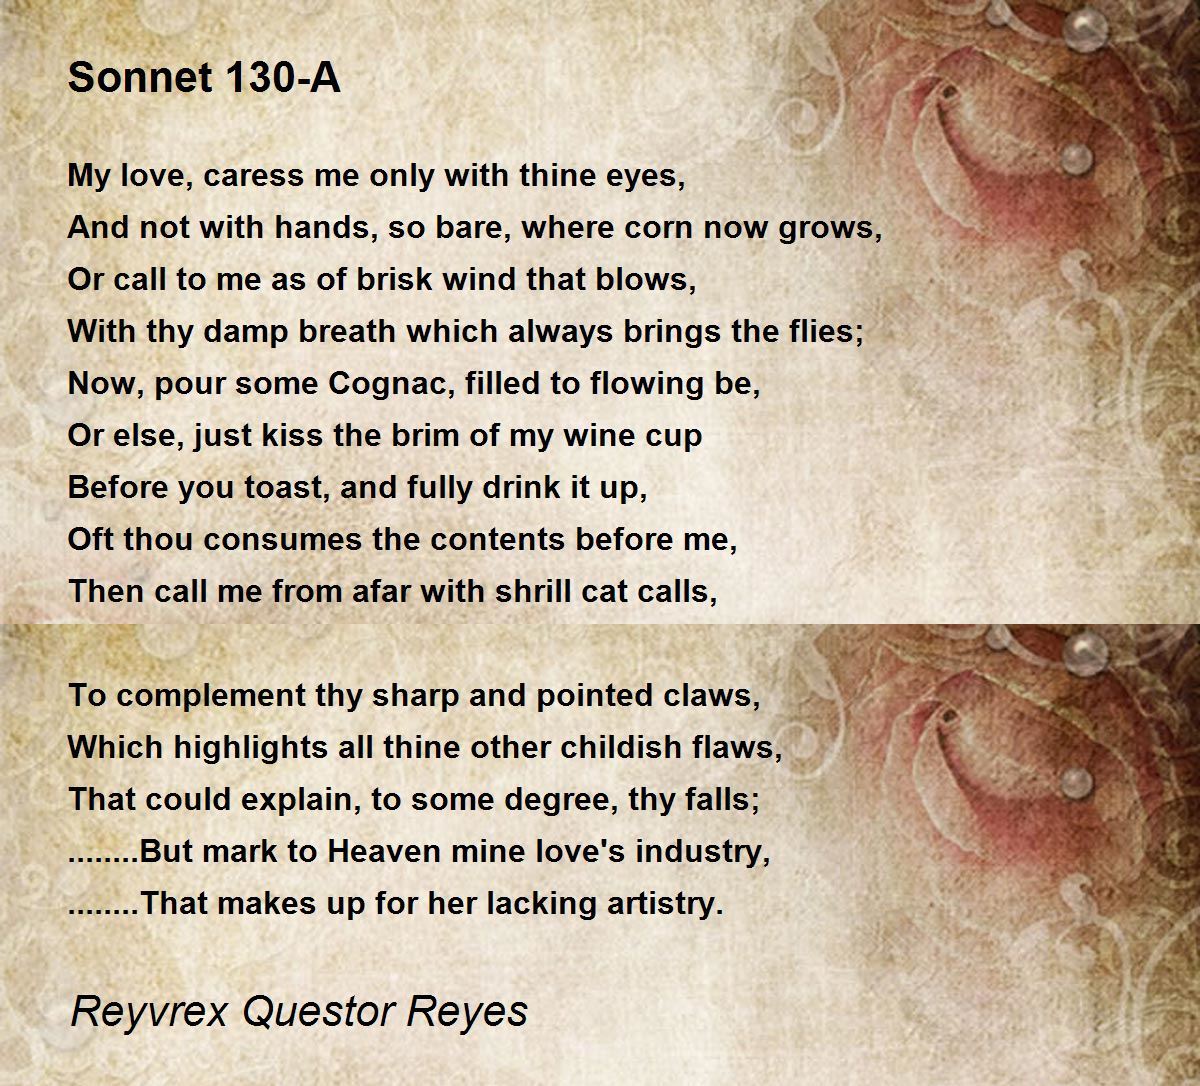 poetry essay on sonnet 130 structure